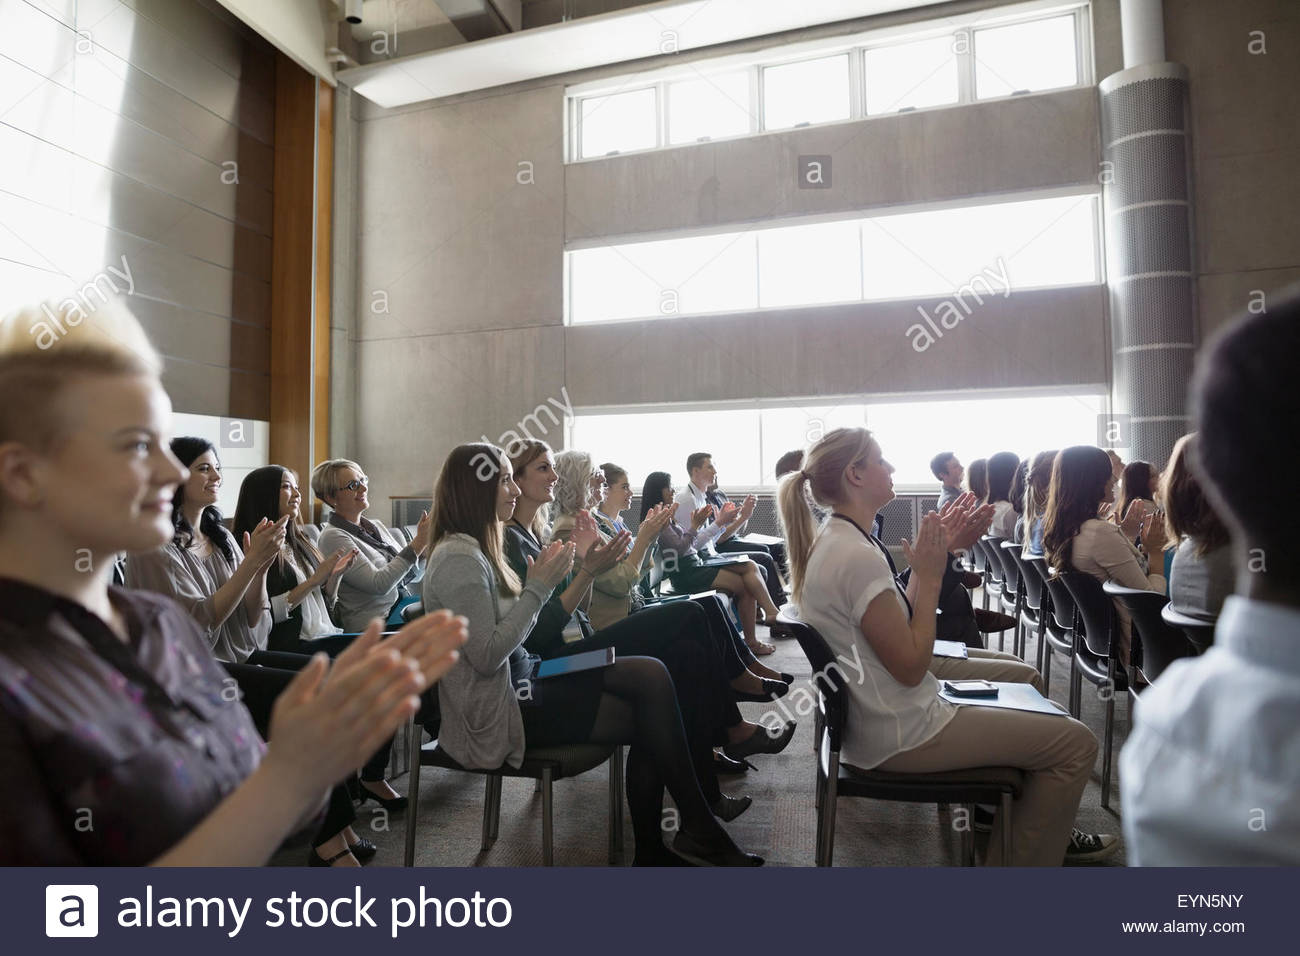 Students clapping in auditorium audience Stock Photo